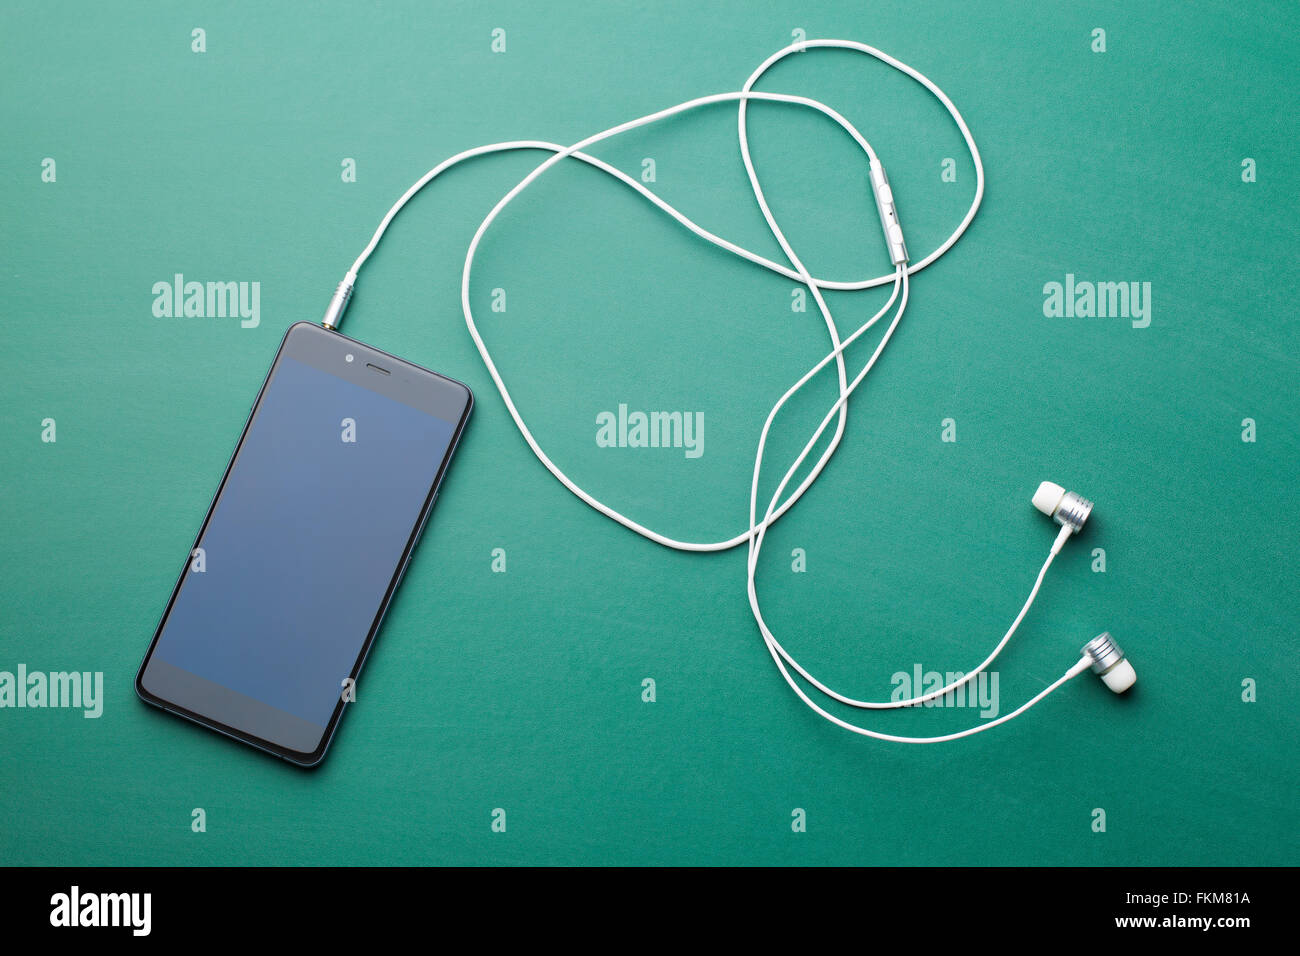 earphones and cellphone on green chalkboard Stock Photo